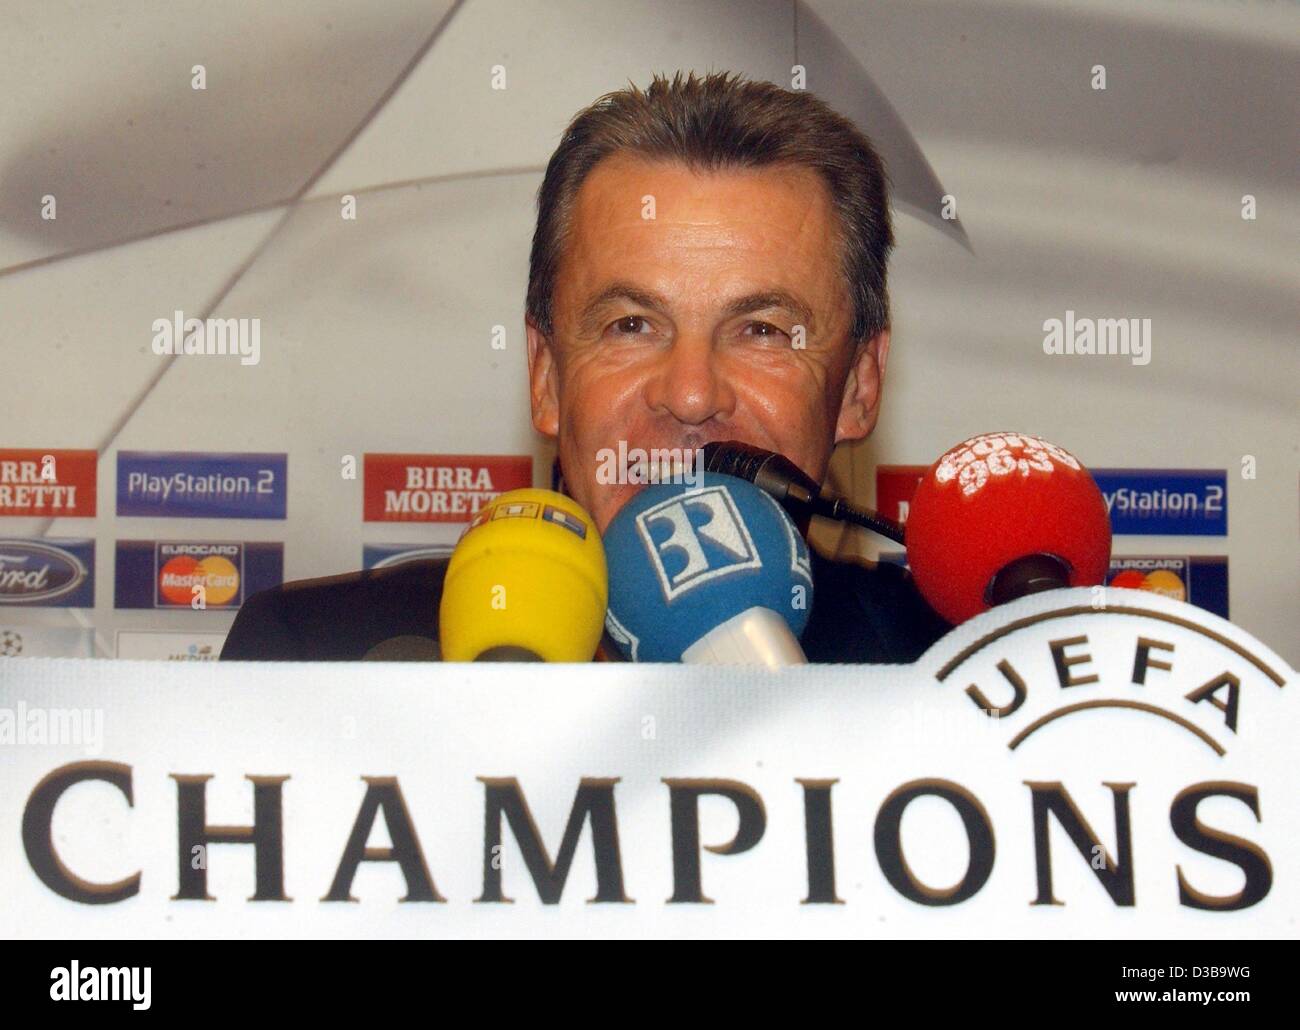 (dpa) - Ottmar Hitzfeld, coach of the German soccer club FC Bayern Munich, looks confident during a press conference in Milan, Italy, 22 October 2002. The next day, Bayern faces AC Milan for the Champions League Group G match. Stock Photo